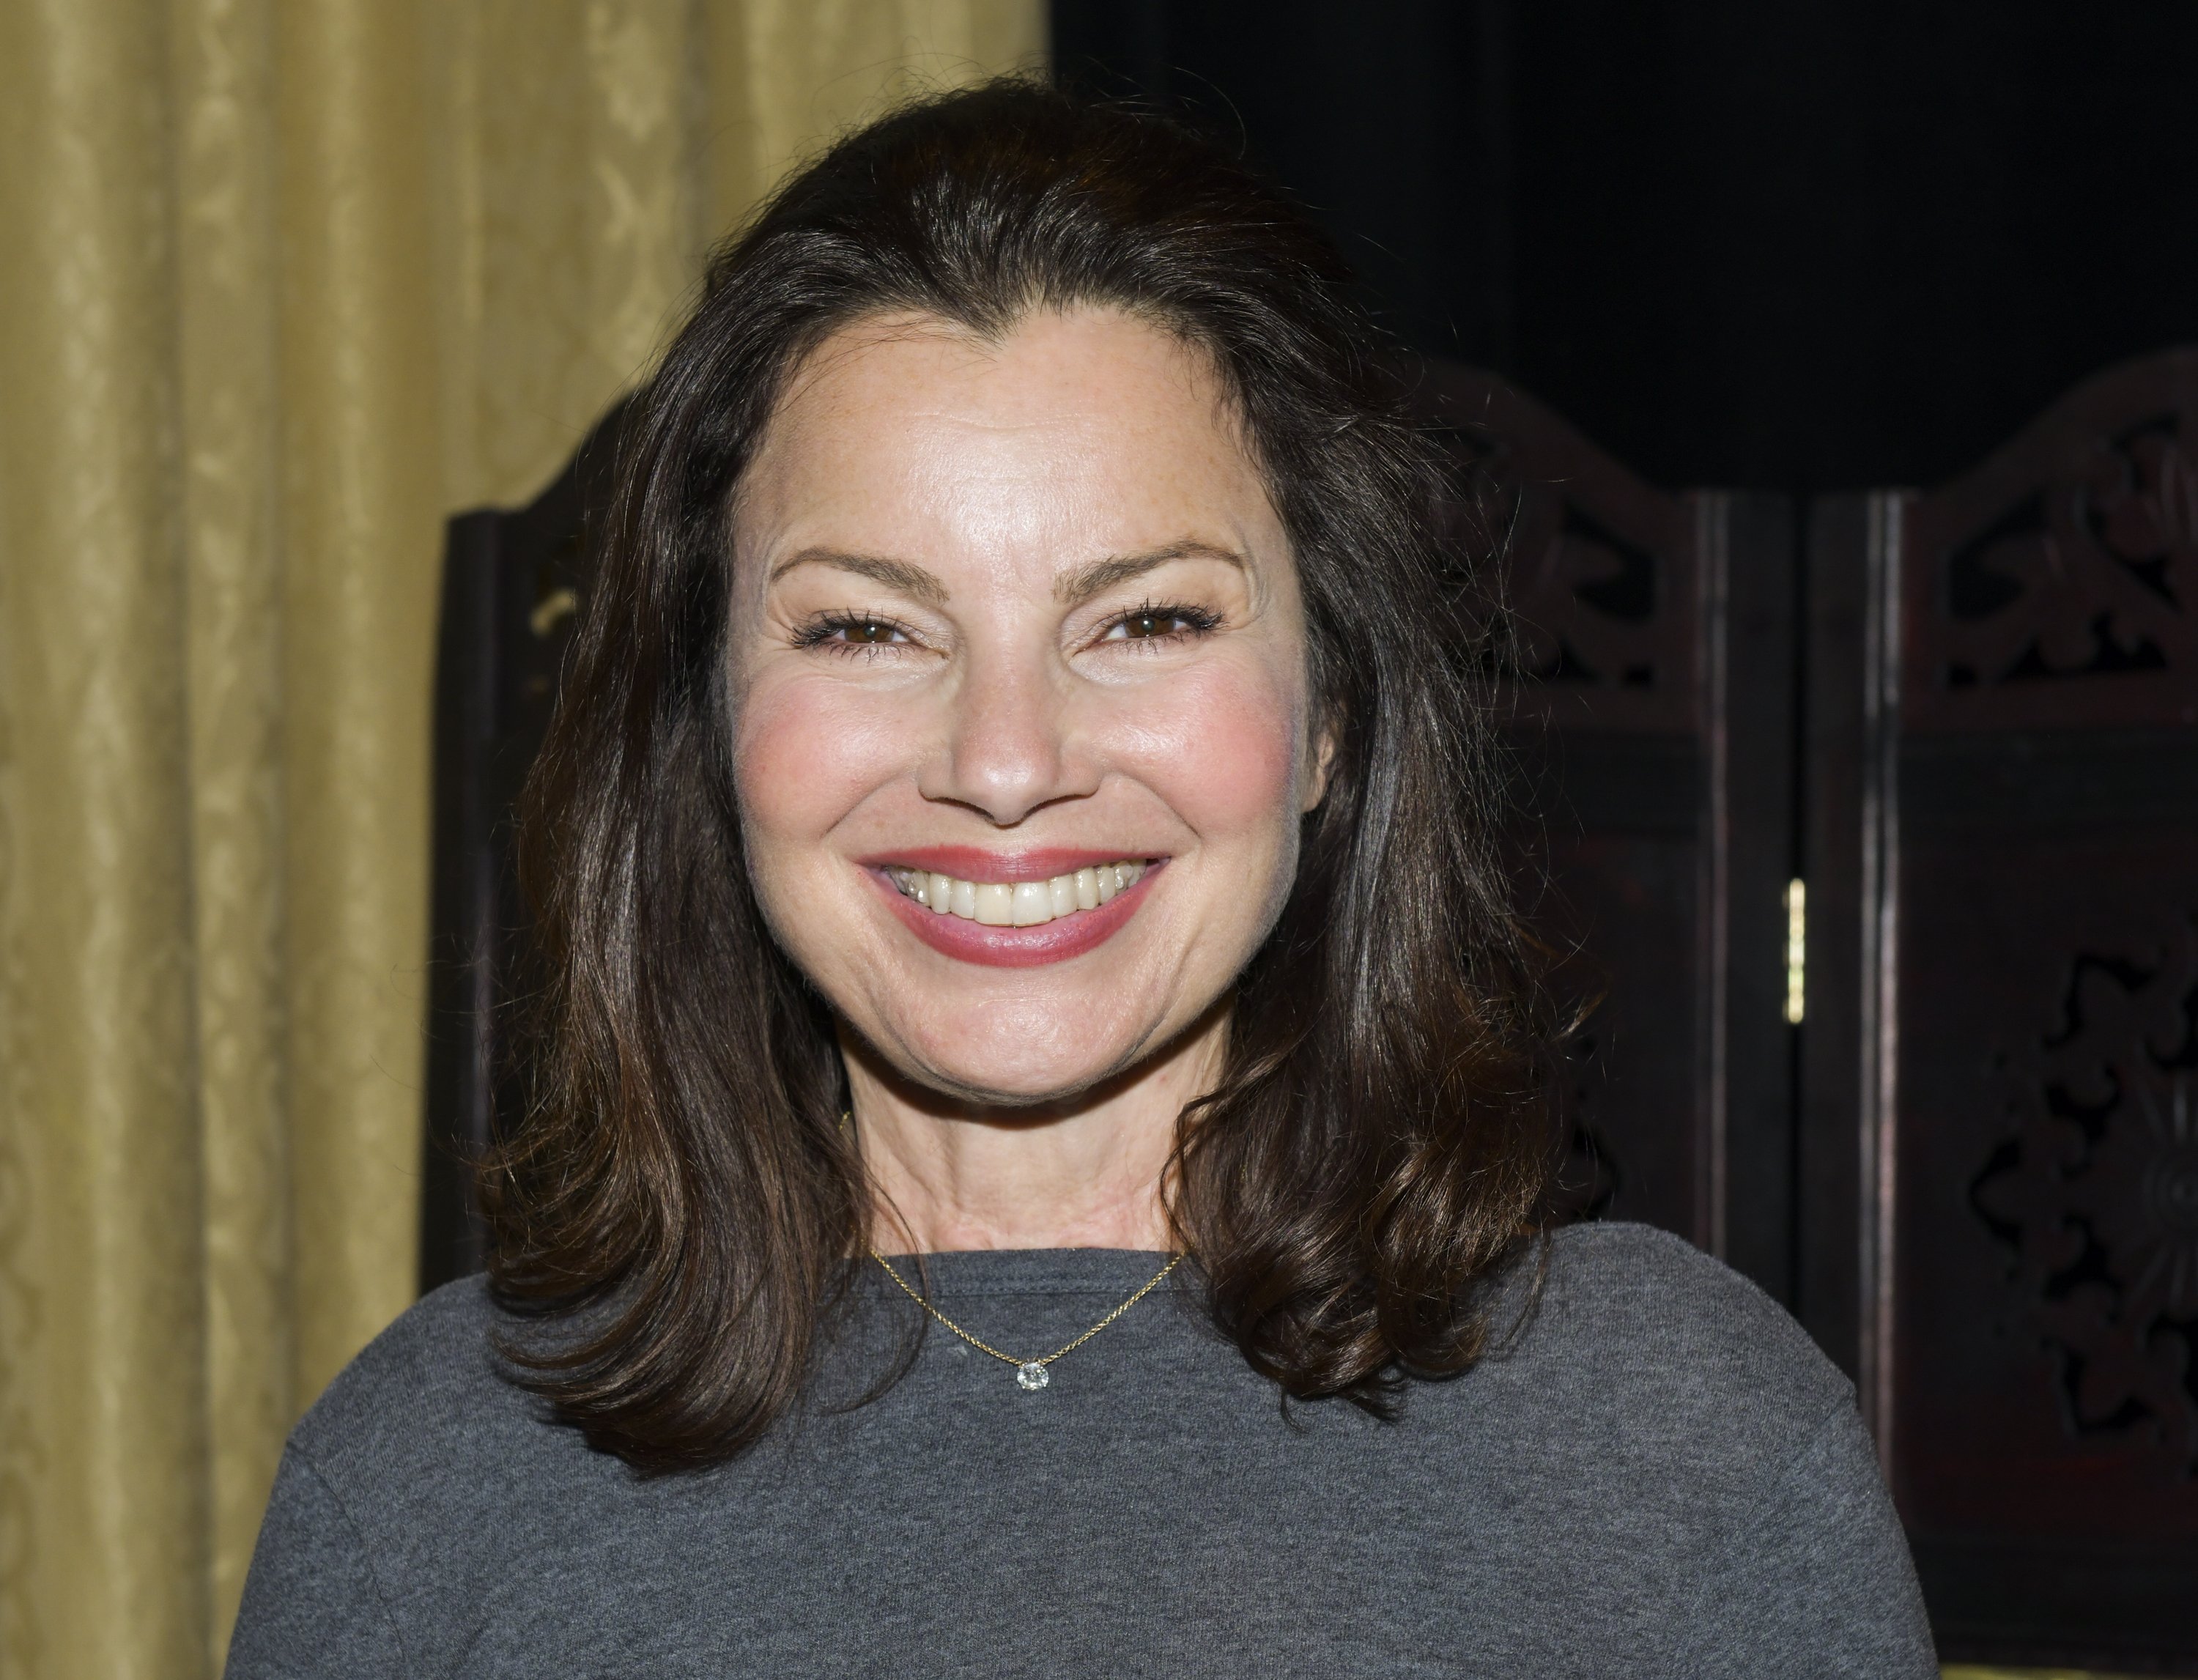 Fran Drescher attends the Premiere of Renee Taylor's "My Life On A Diet" on April 05, 2019 | Photo: Getty Images